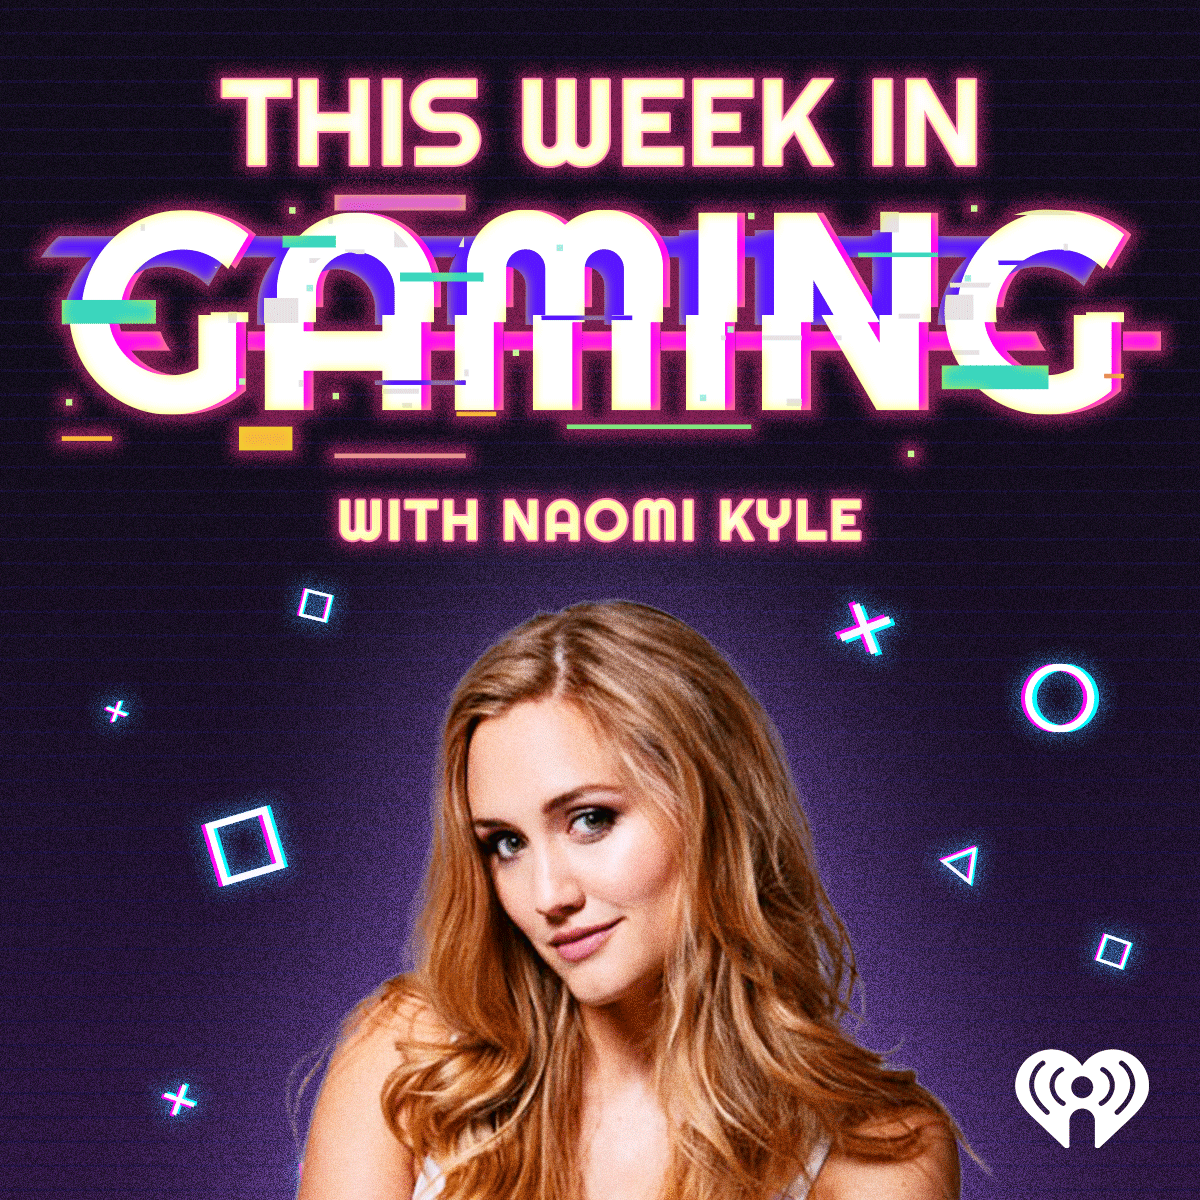 This Week in Gaming with Naomi Kyle - Coming Soon